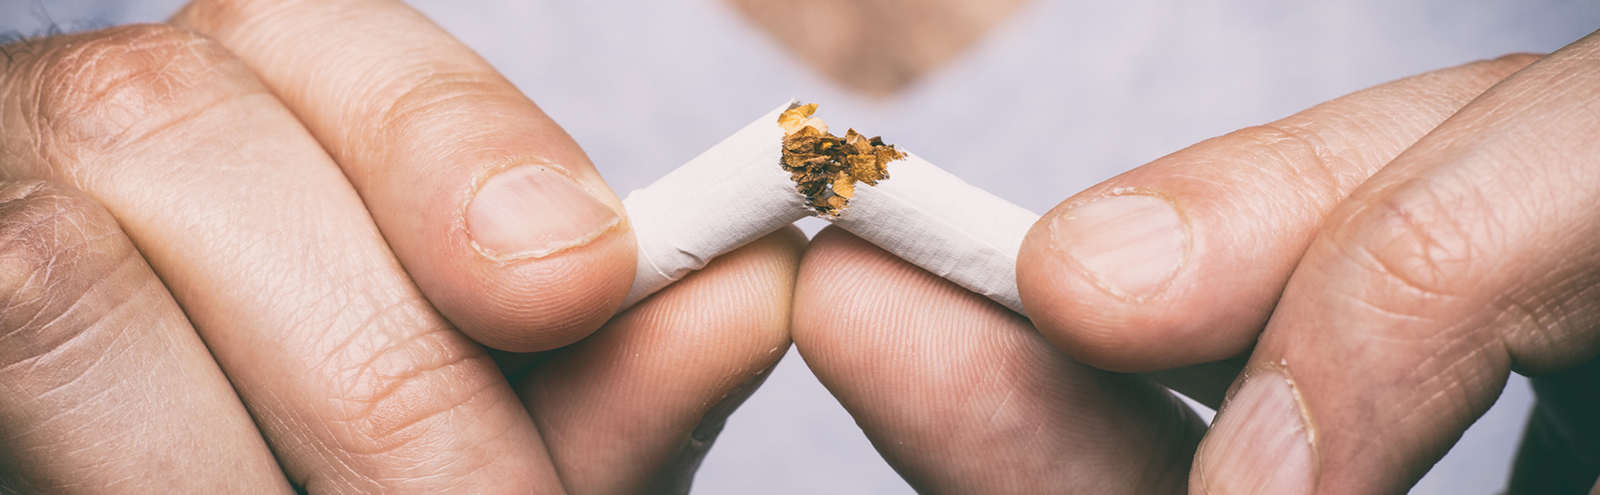 5 ways smoking affects your oral health